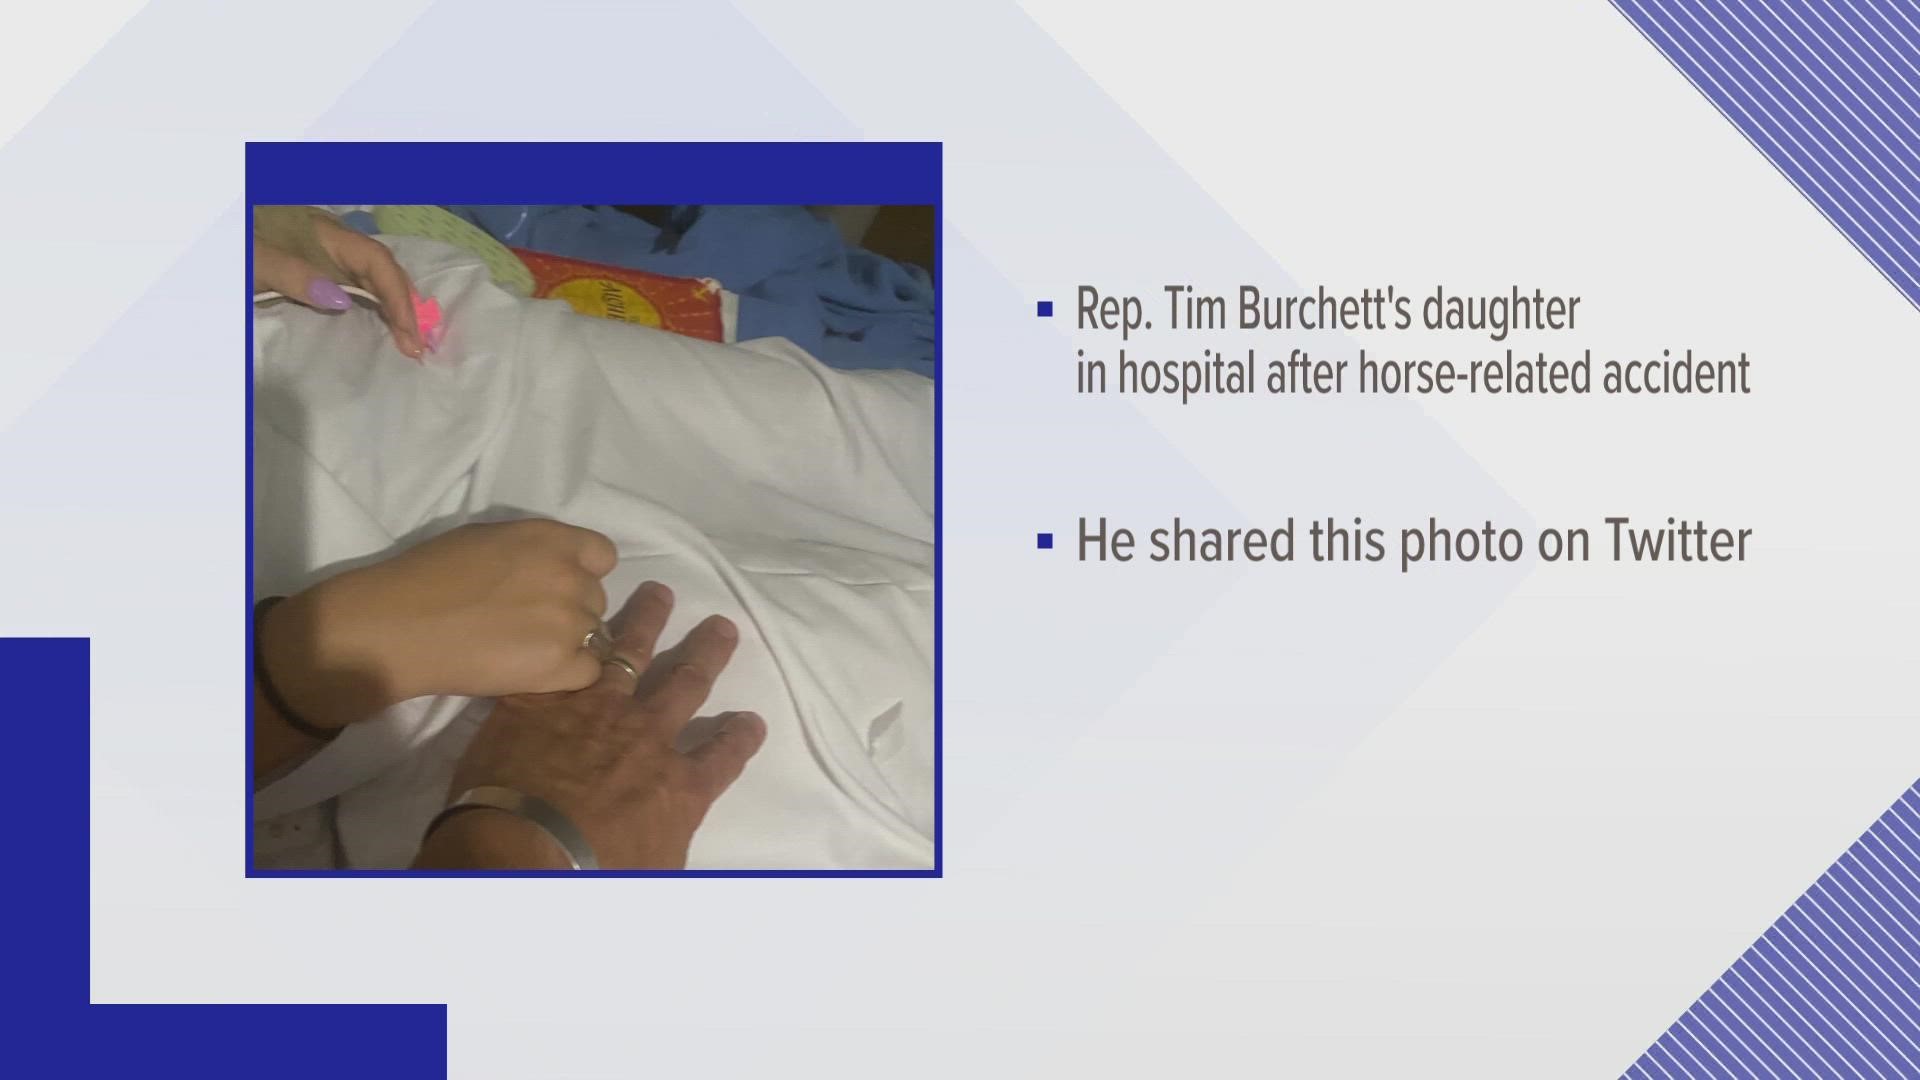 U.S. Representative Tim Burchett of Knoxville is asking for thoughts and prayers after his daughter was injured in a horse-related accident on Friday.